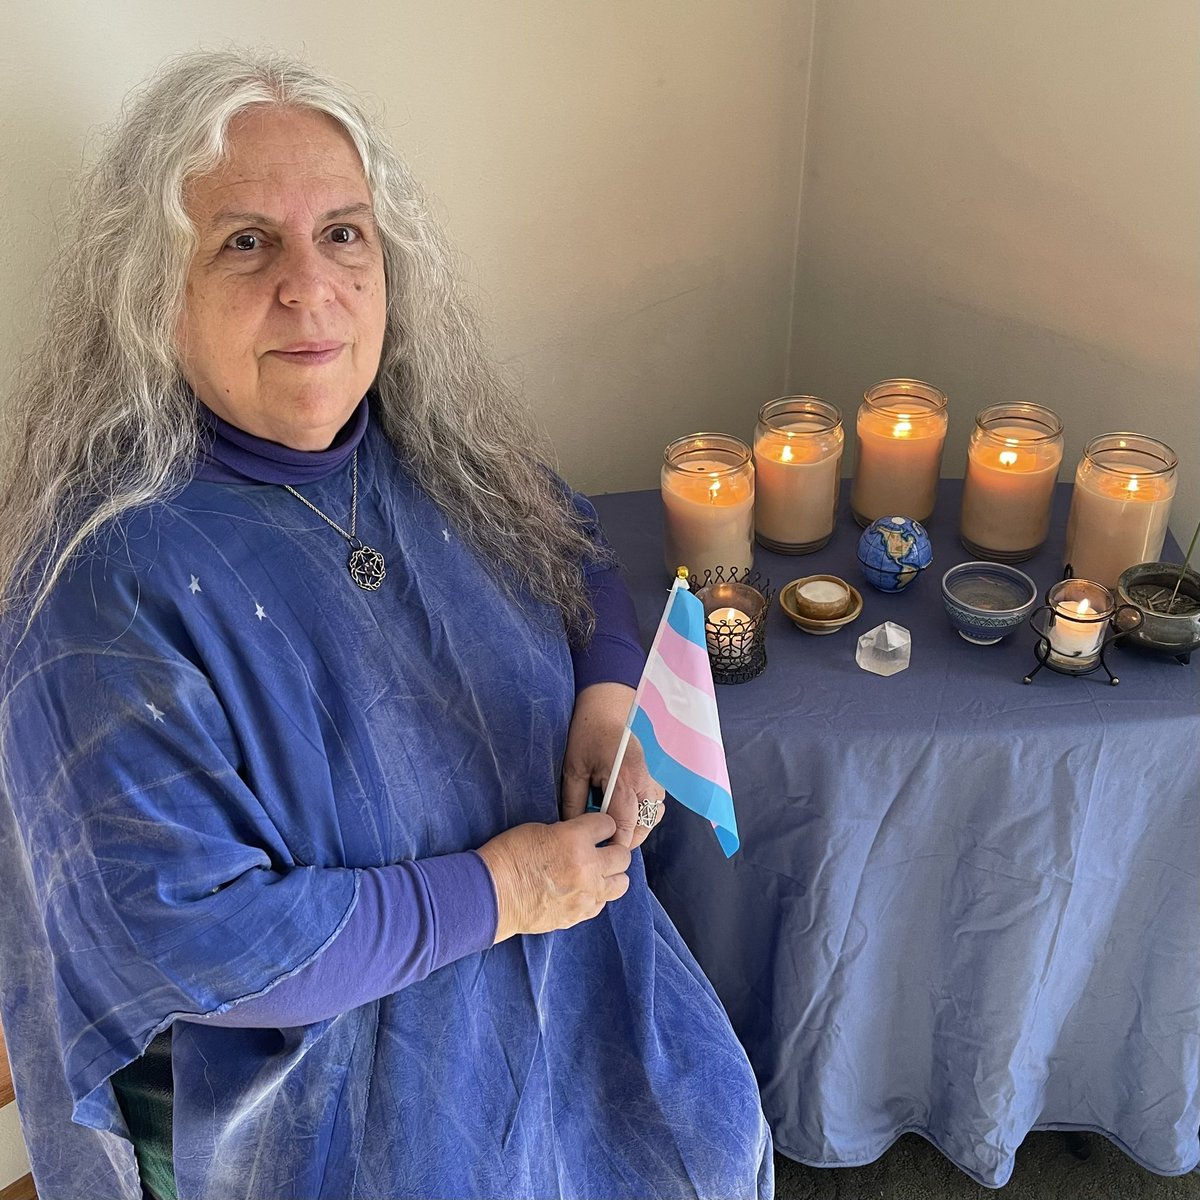 #TransgenderDayofRemembrance #TDOR #TDOR2022 Remembering the Dead. Supporting the Living. Transforming the World. Blessed Be.